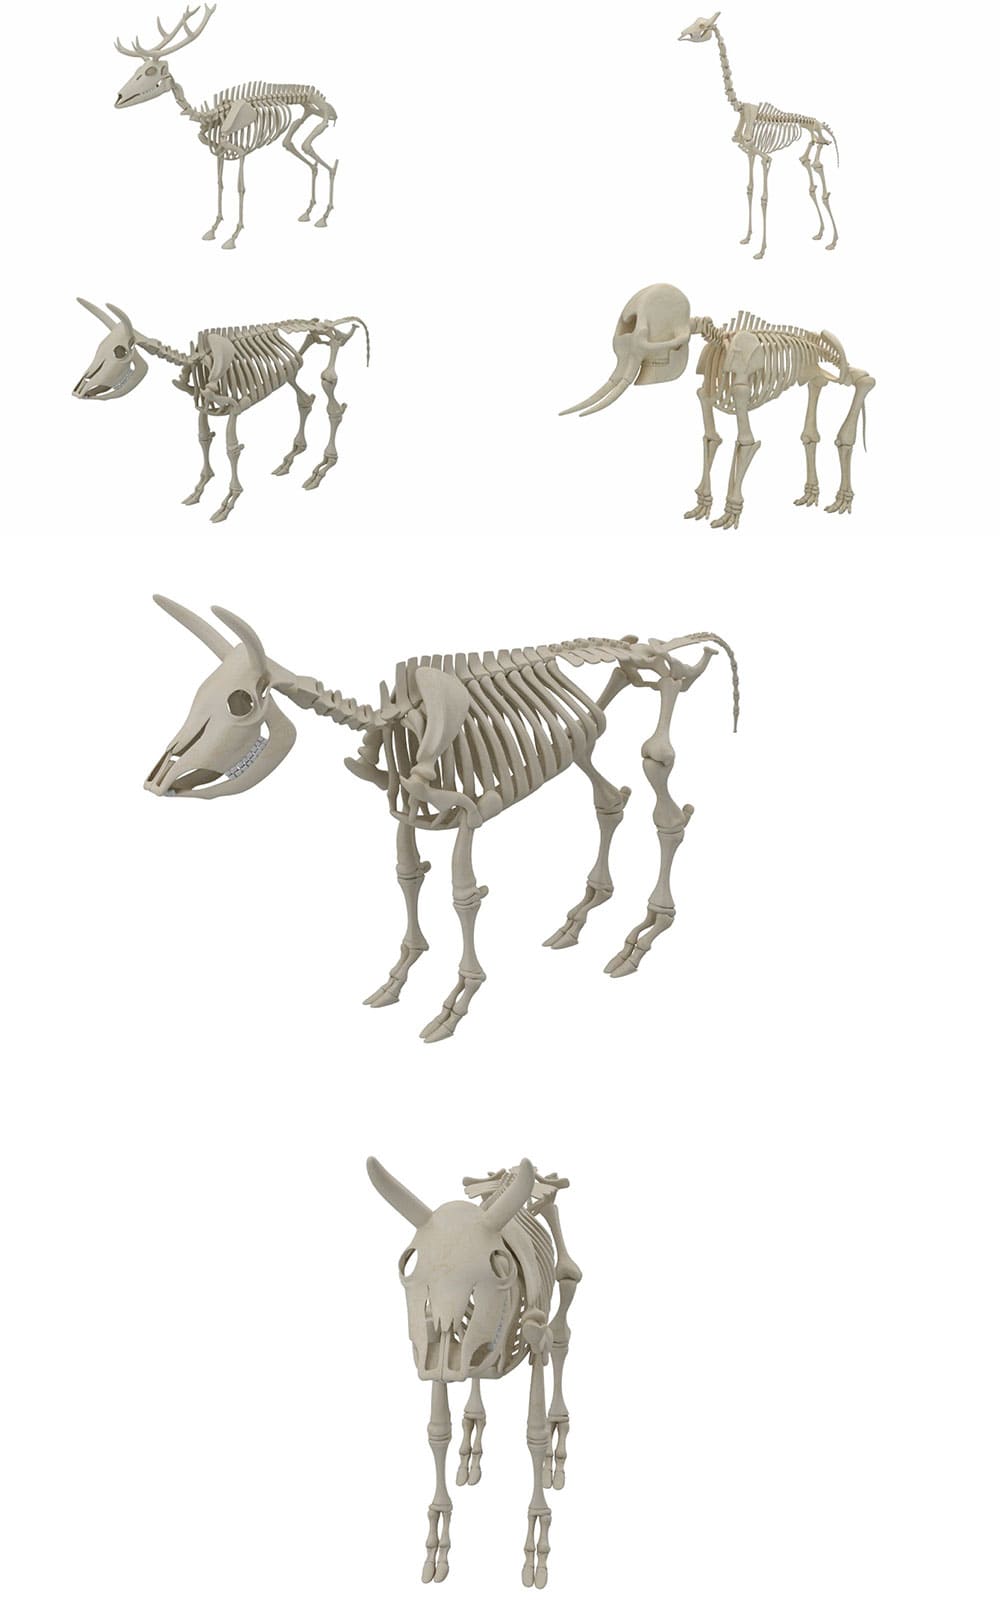 Animal skeleton collection 3d model, picture for pinterest.